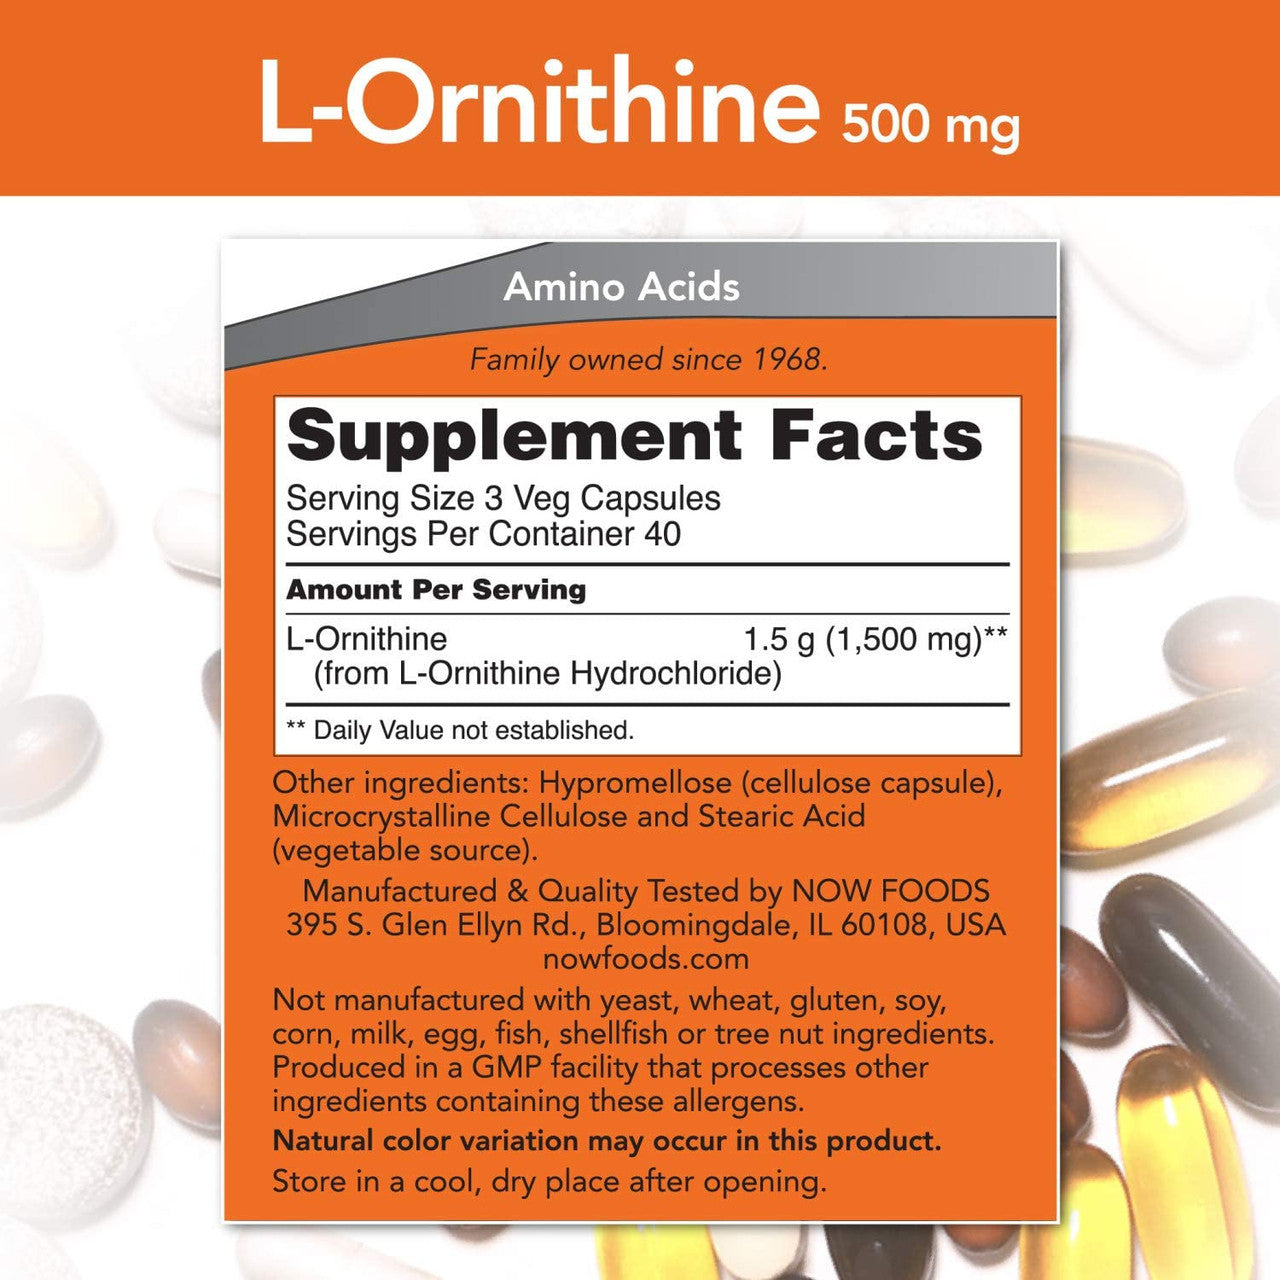 Now L-Ornithine 500 mg supplement facts